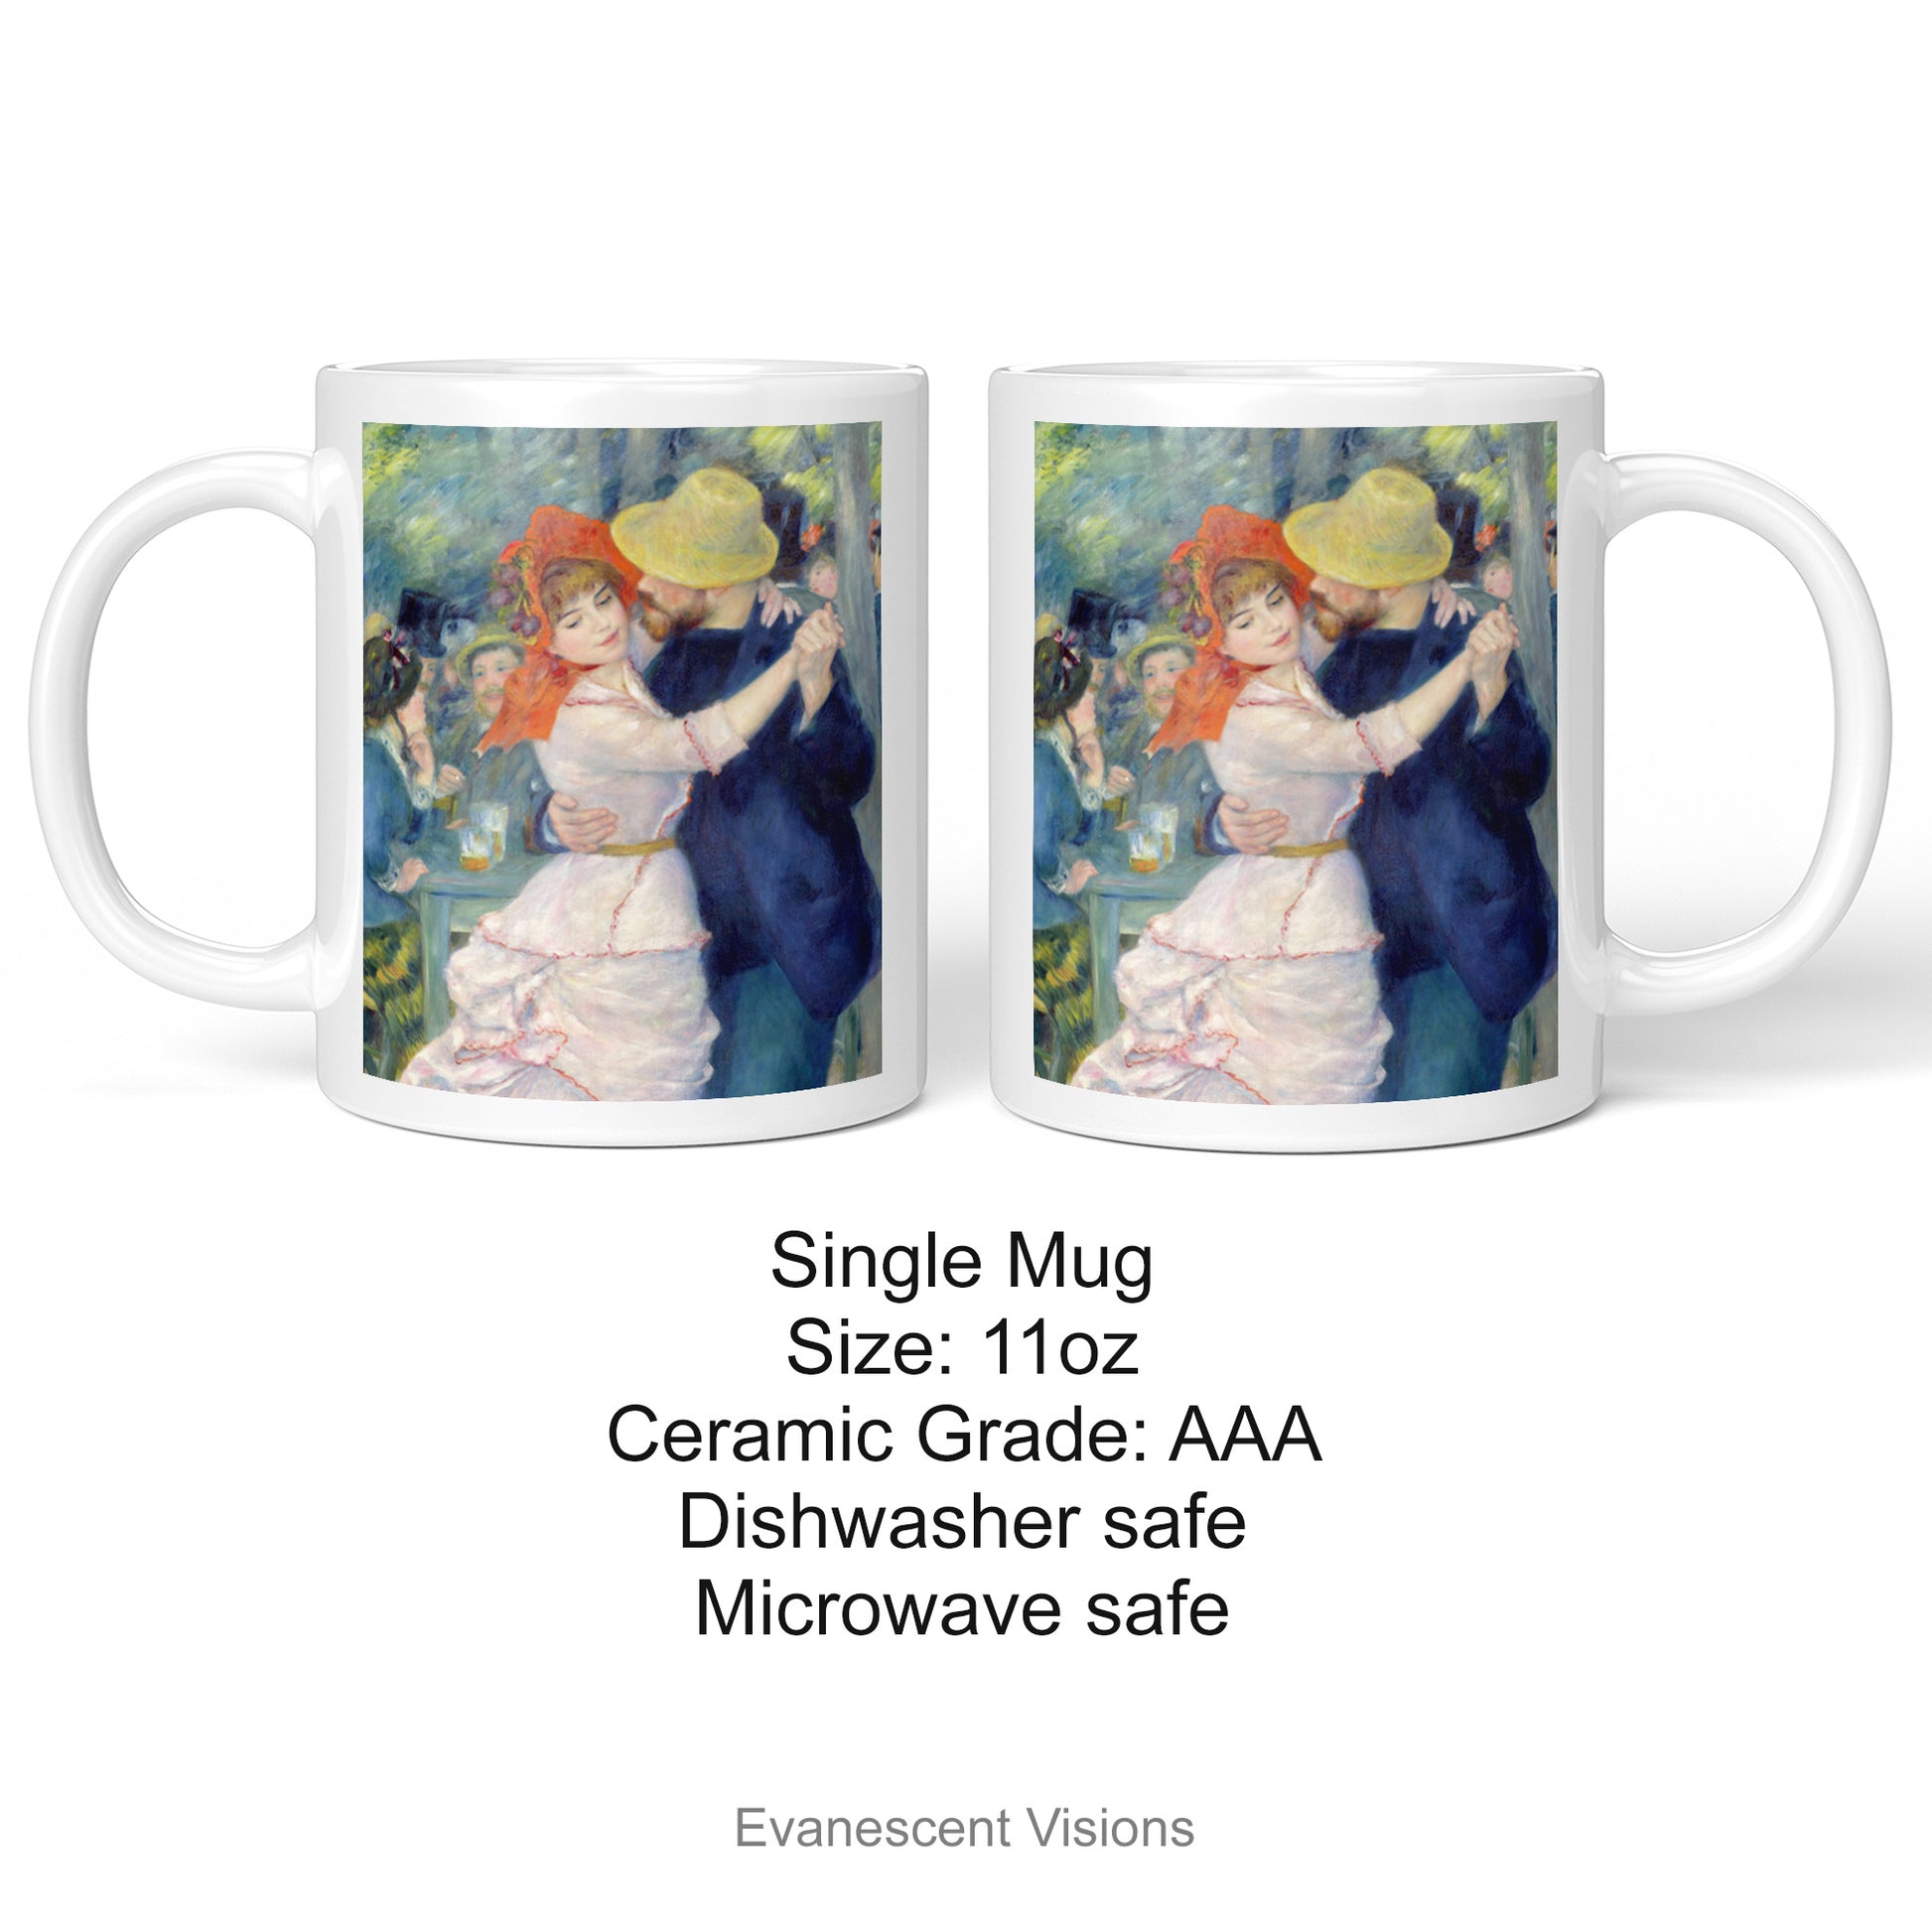 Personalised Art Mug for Anniversary or Valentine's Day with product details